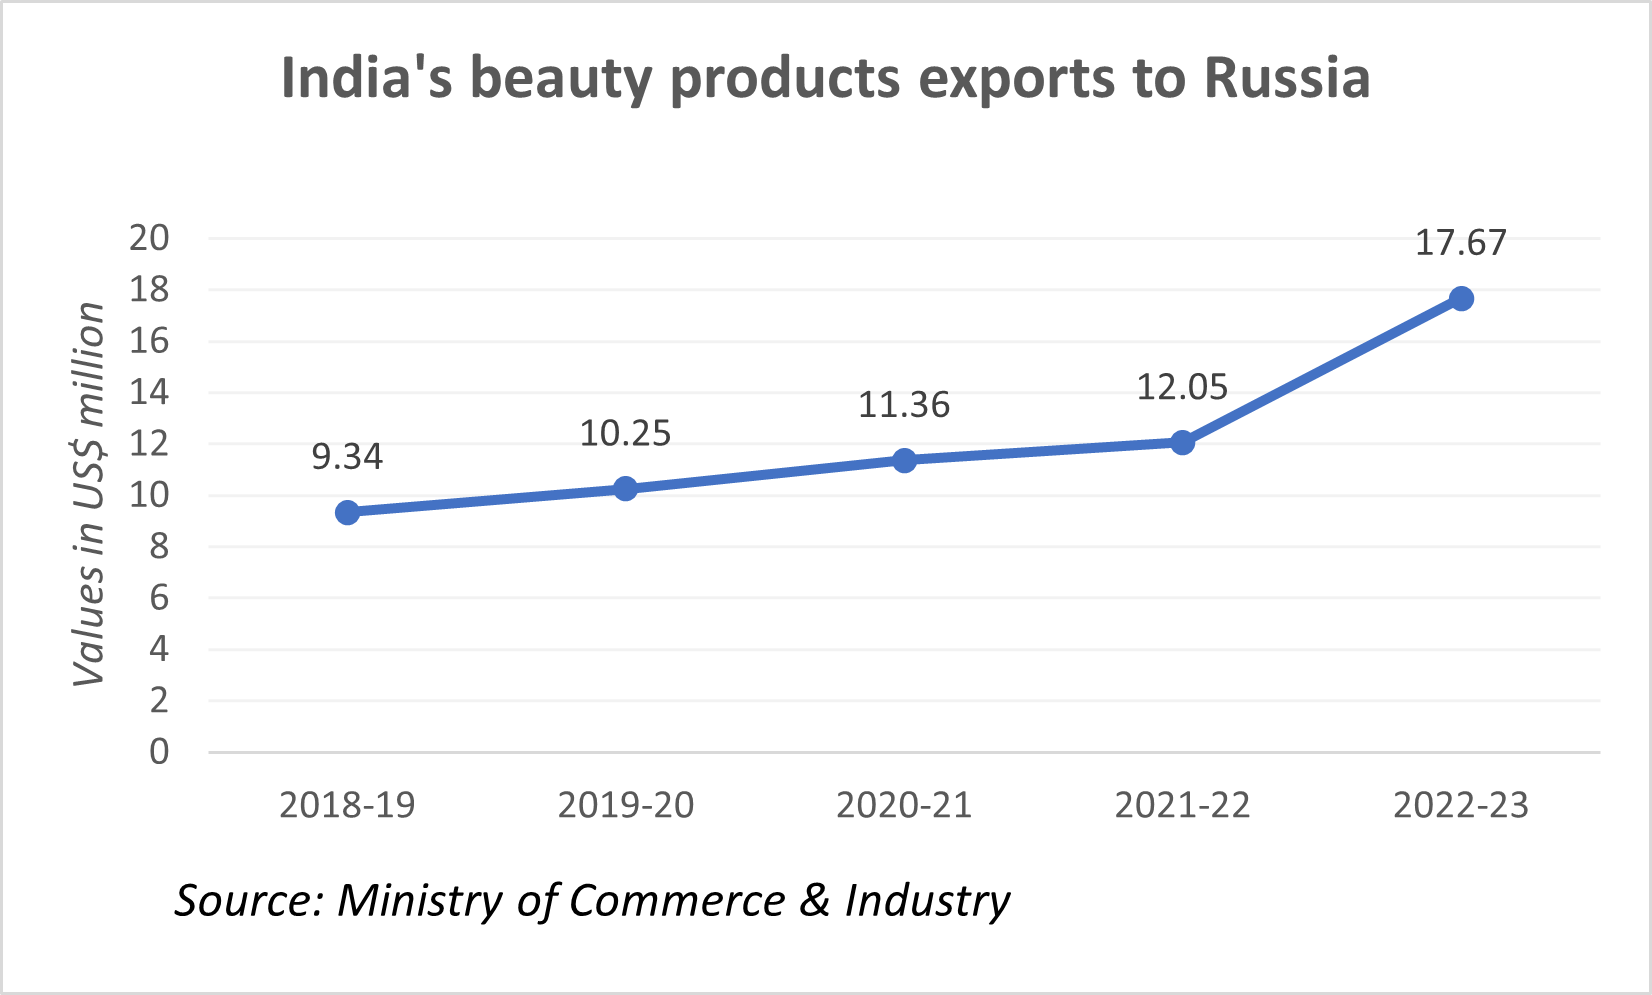 India's exports of beauty products to Russia